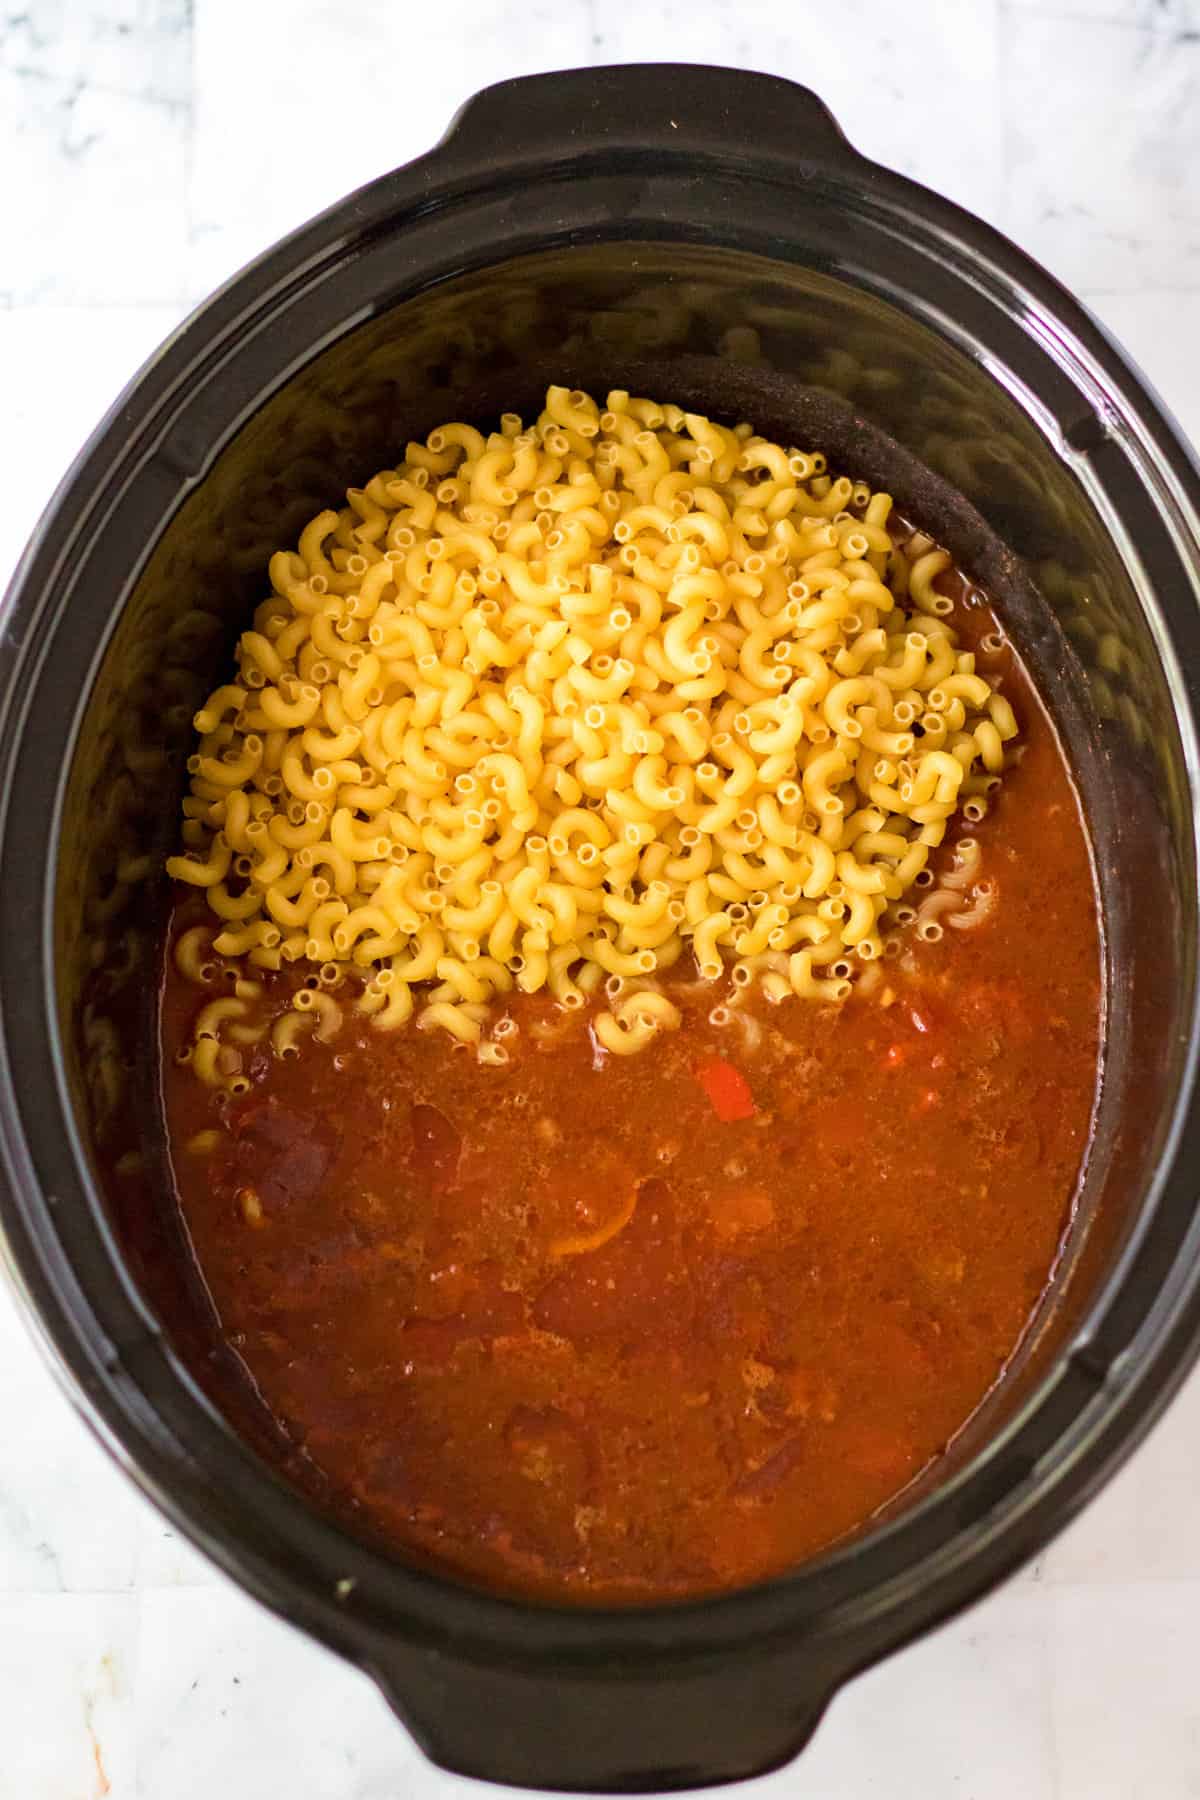 Elbow macaroni noodles added to crock pot.